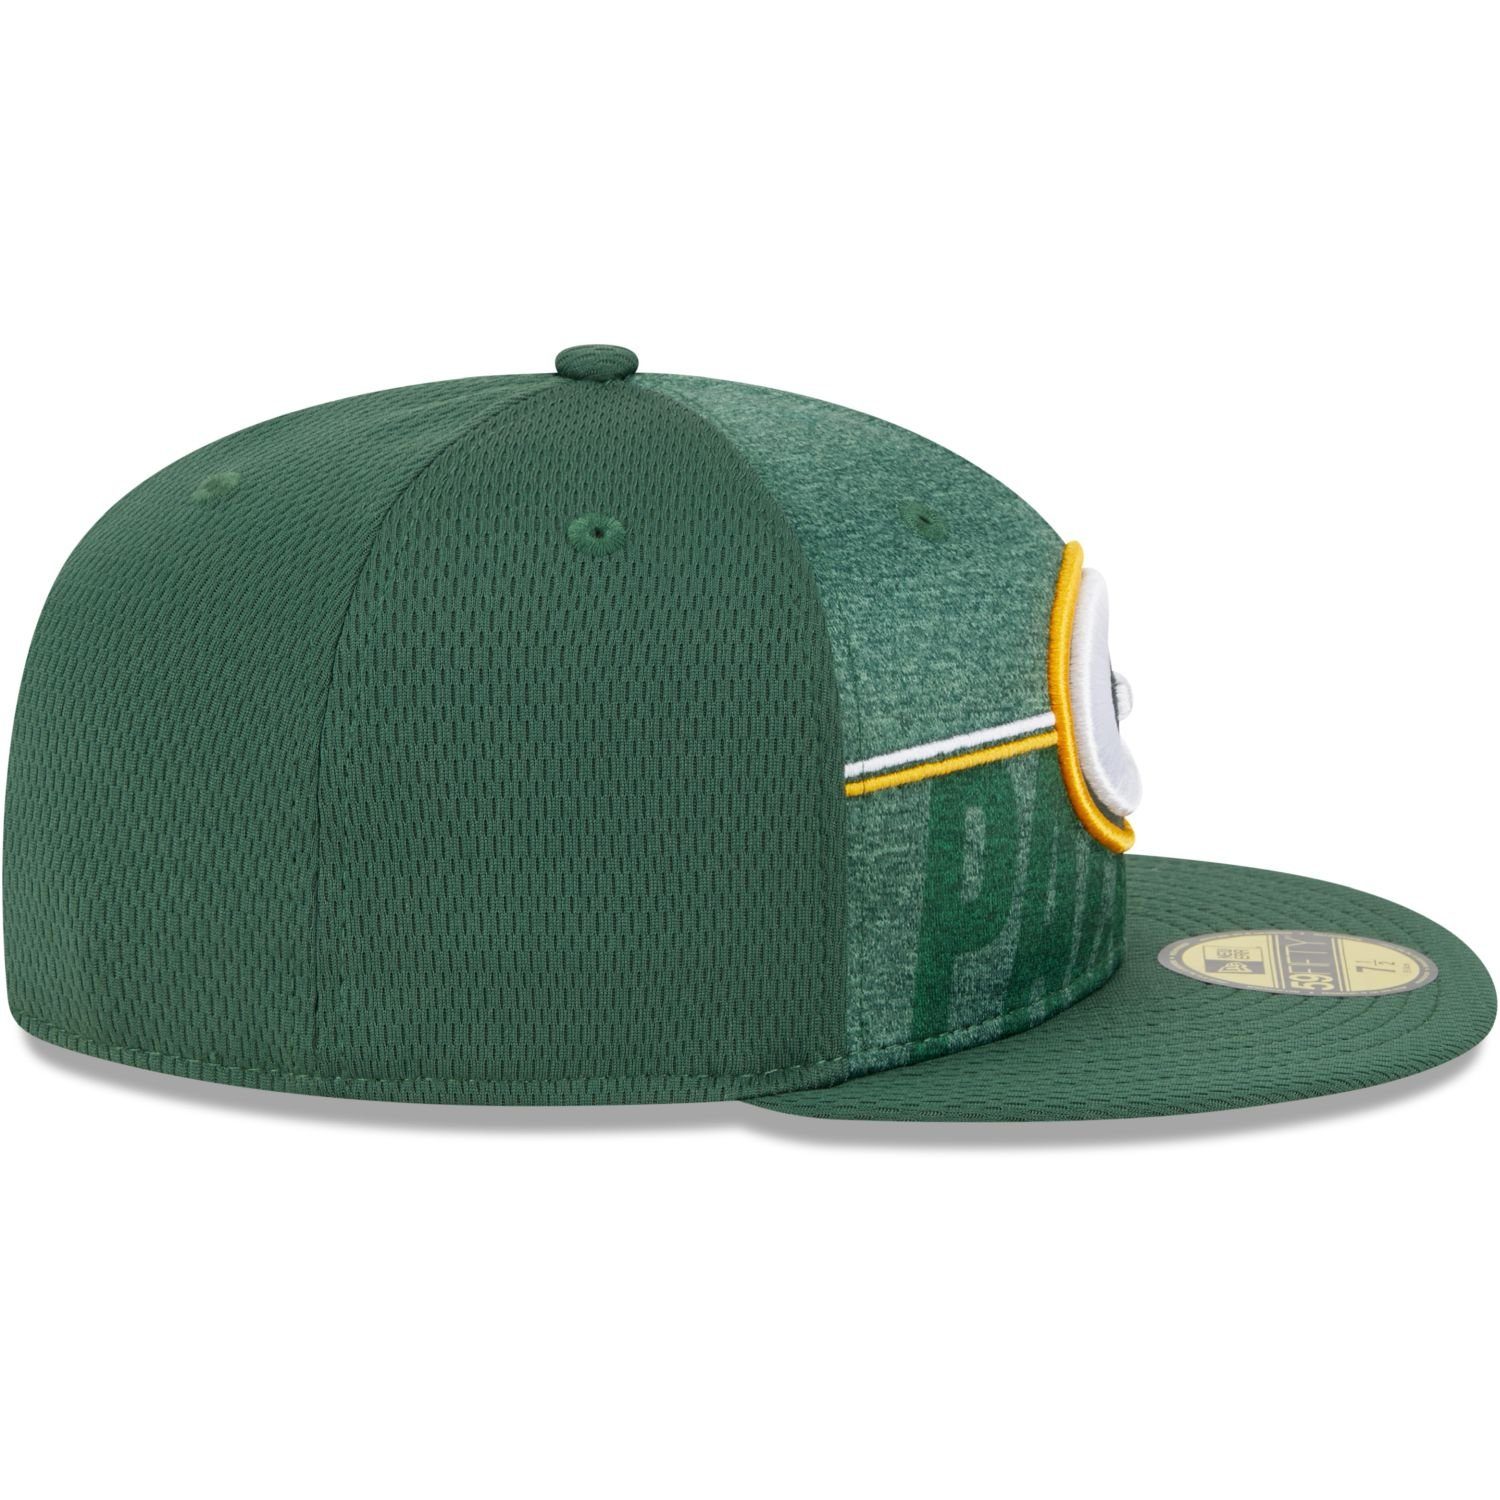 NFL TRAINING Cap Fitted Era Green 59Fifty Bay New Packers